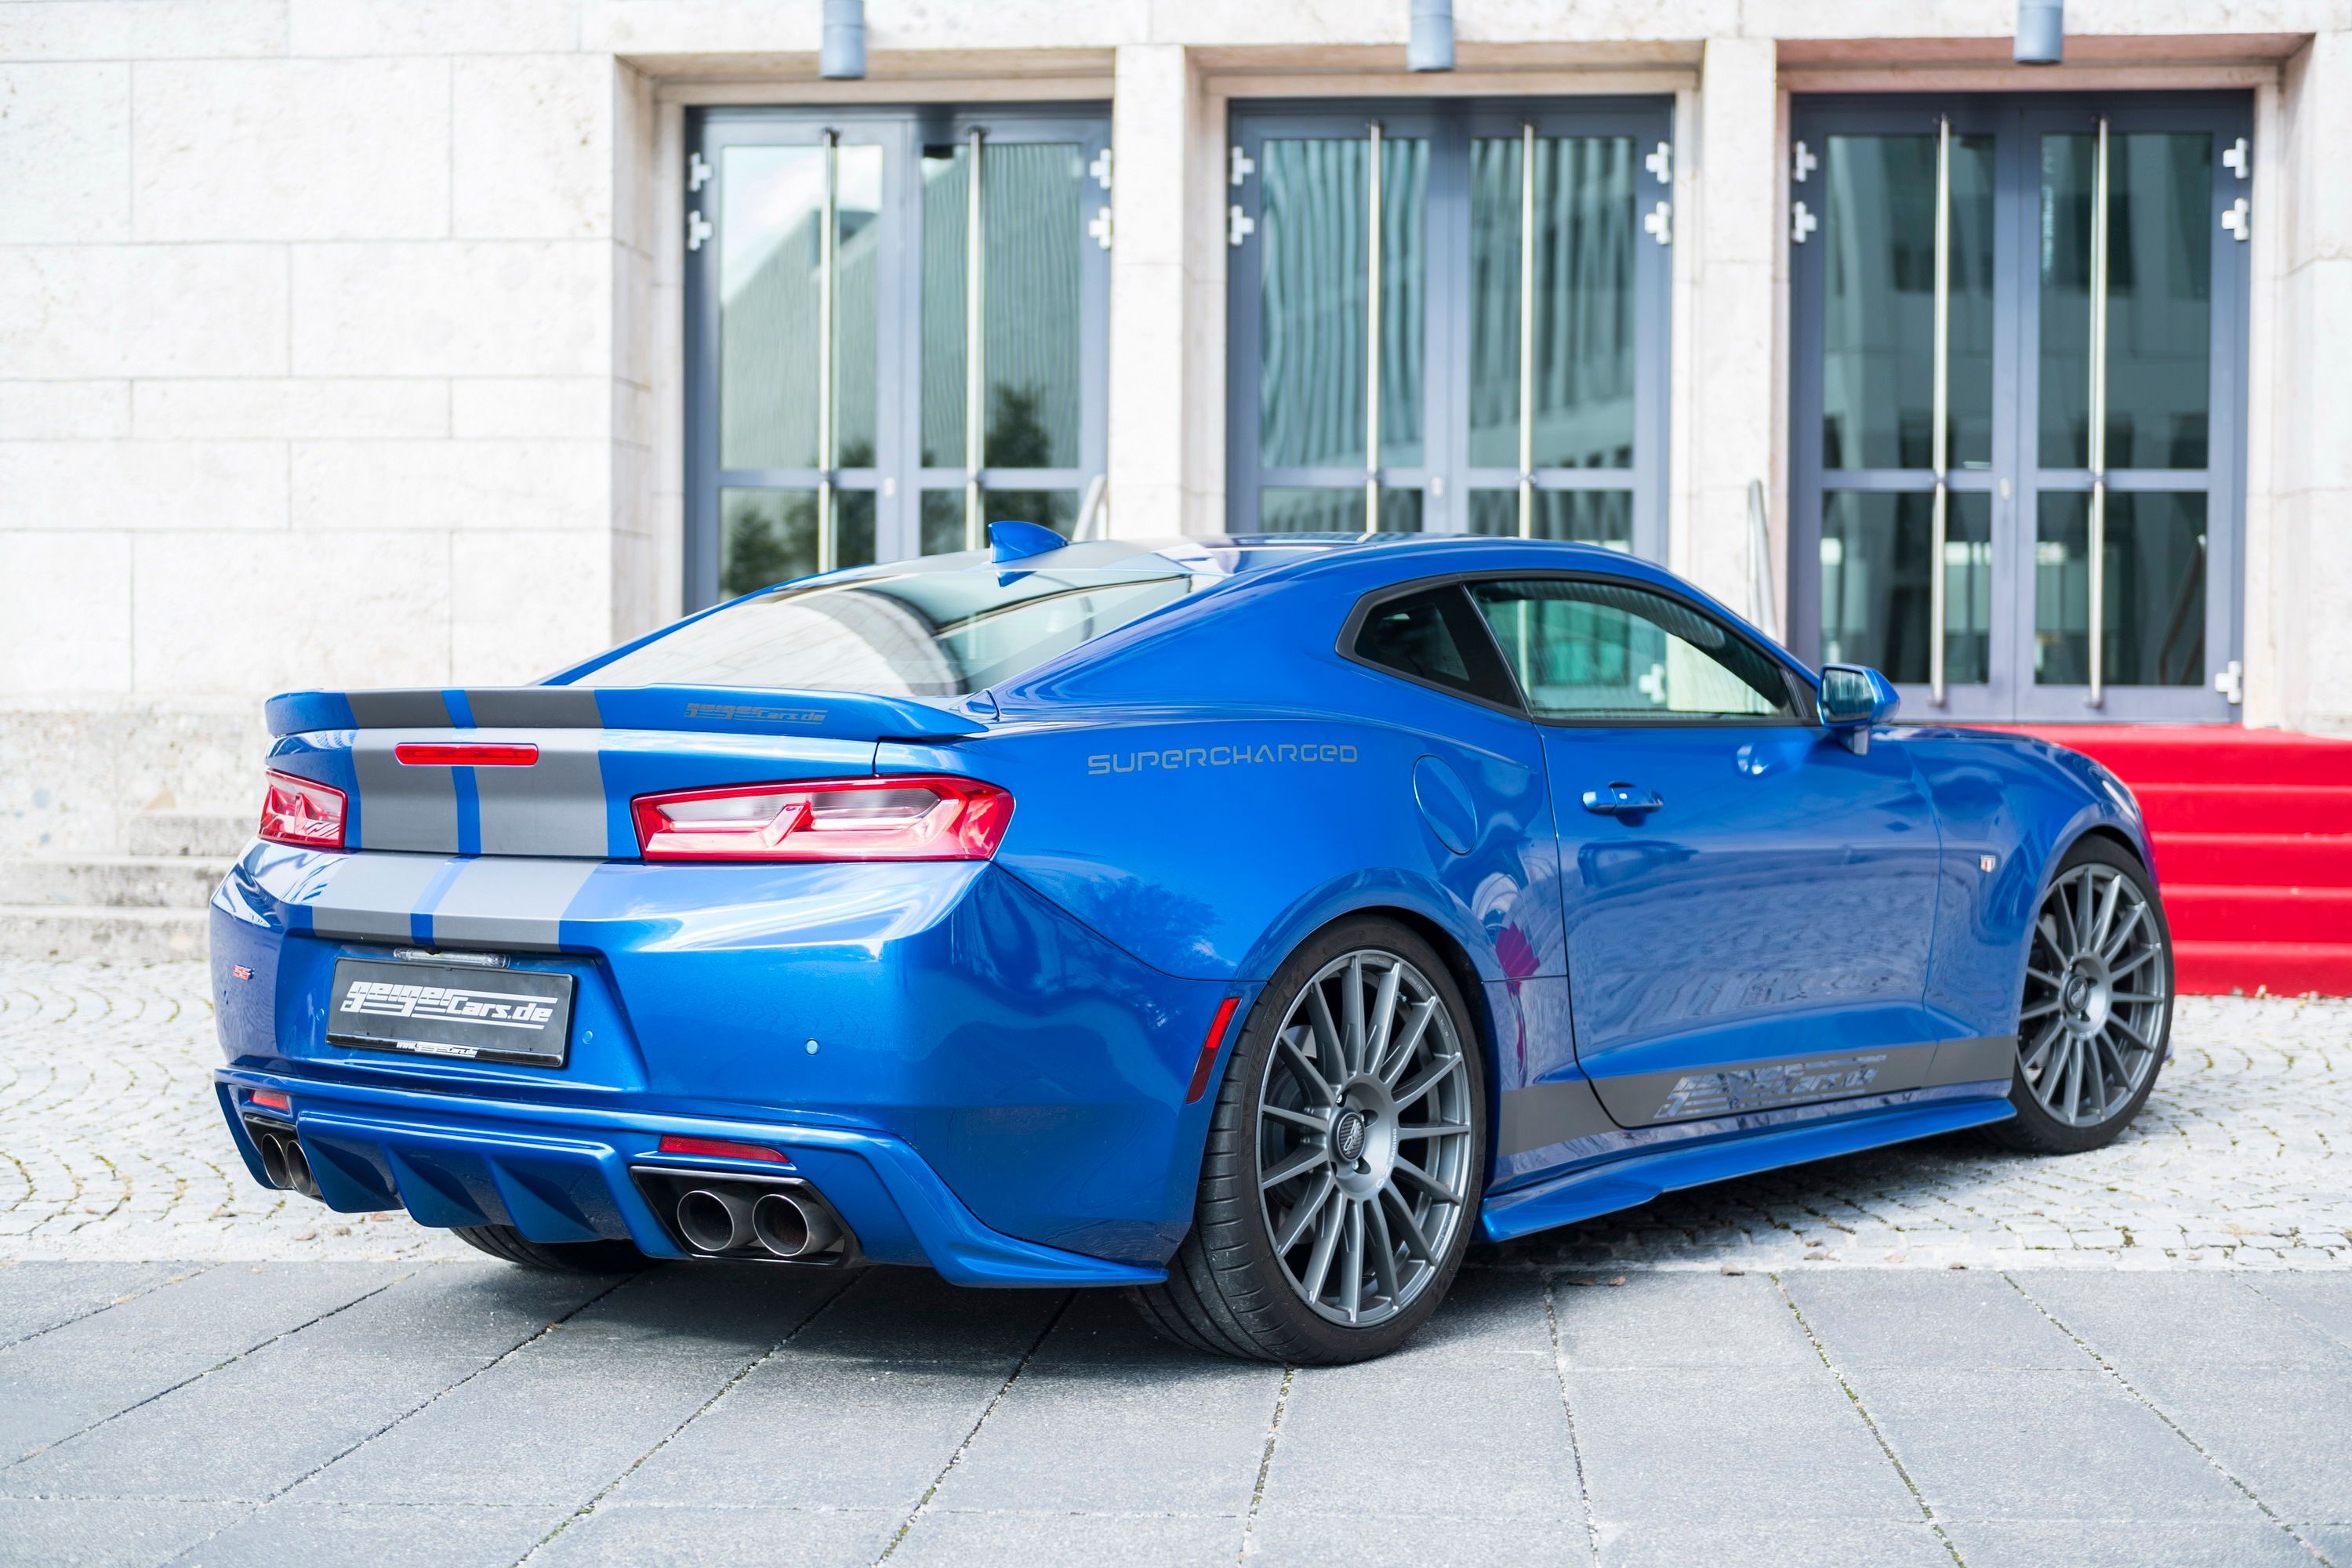 2016 Chevrolet Camaro Supercharged 630 by Geiger Cars